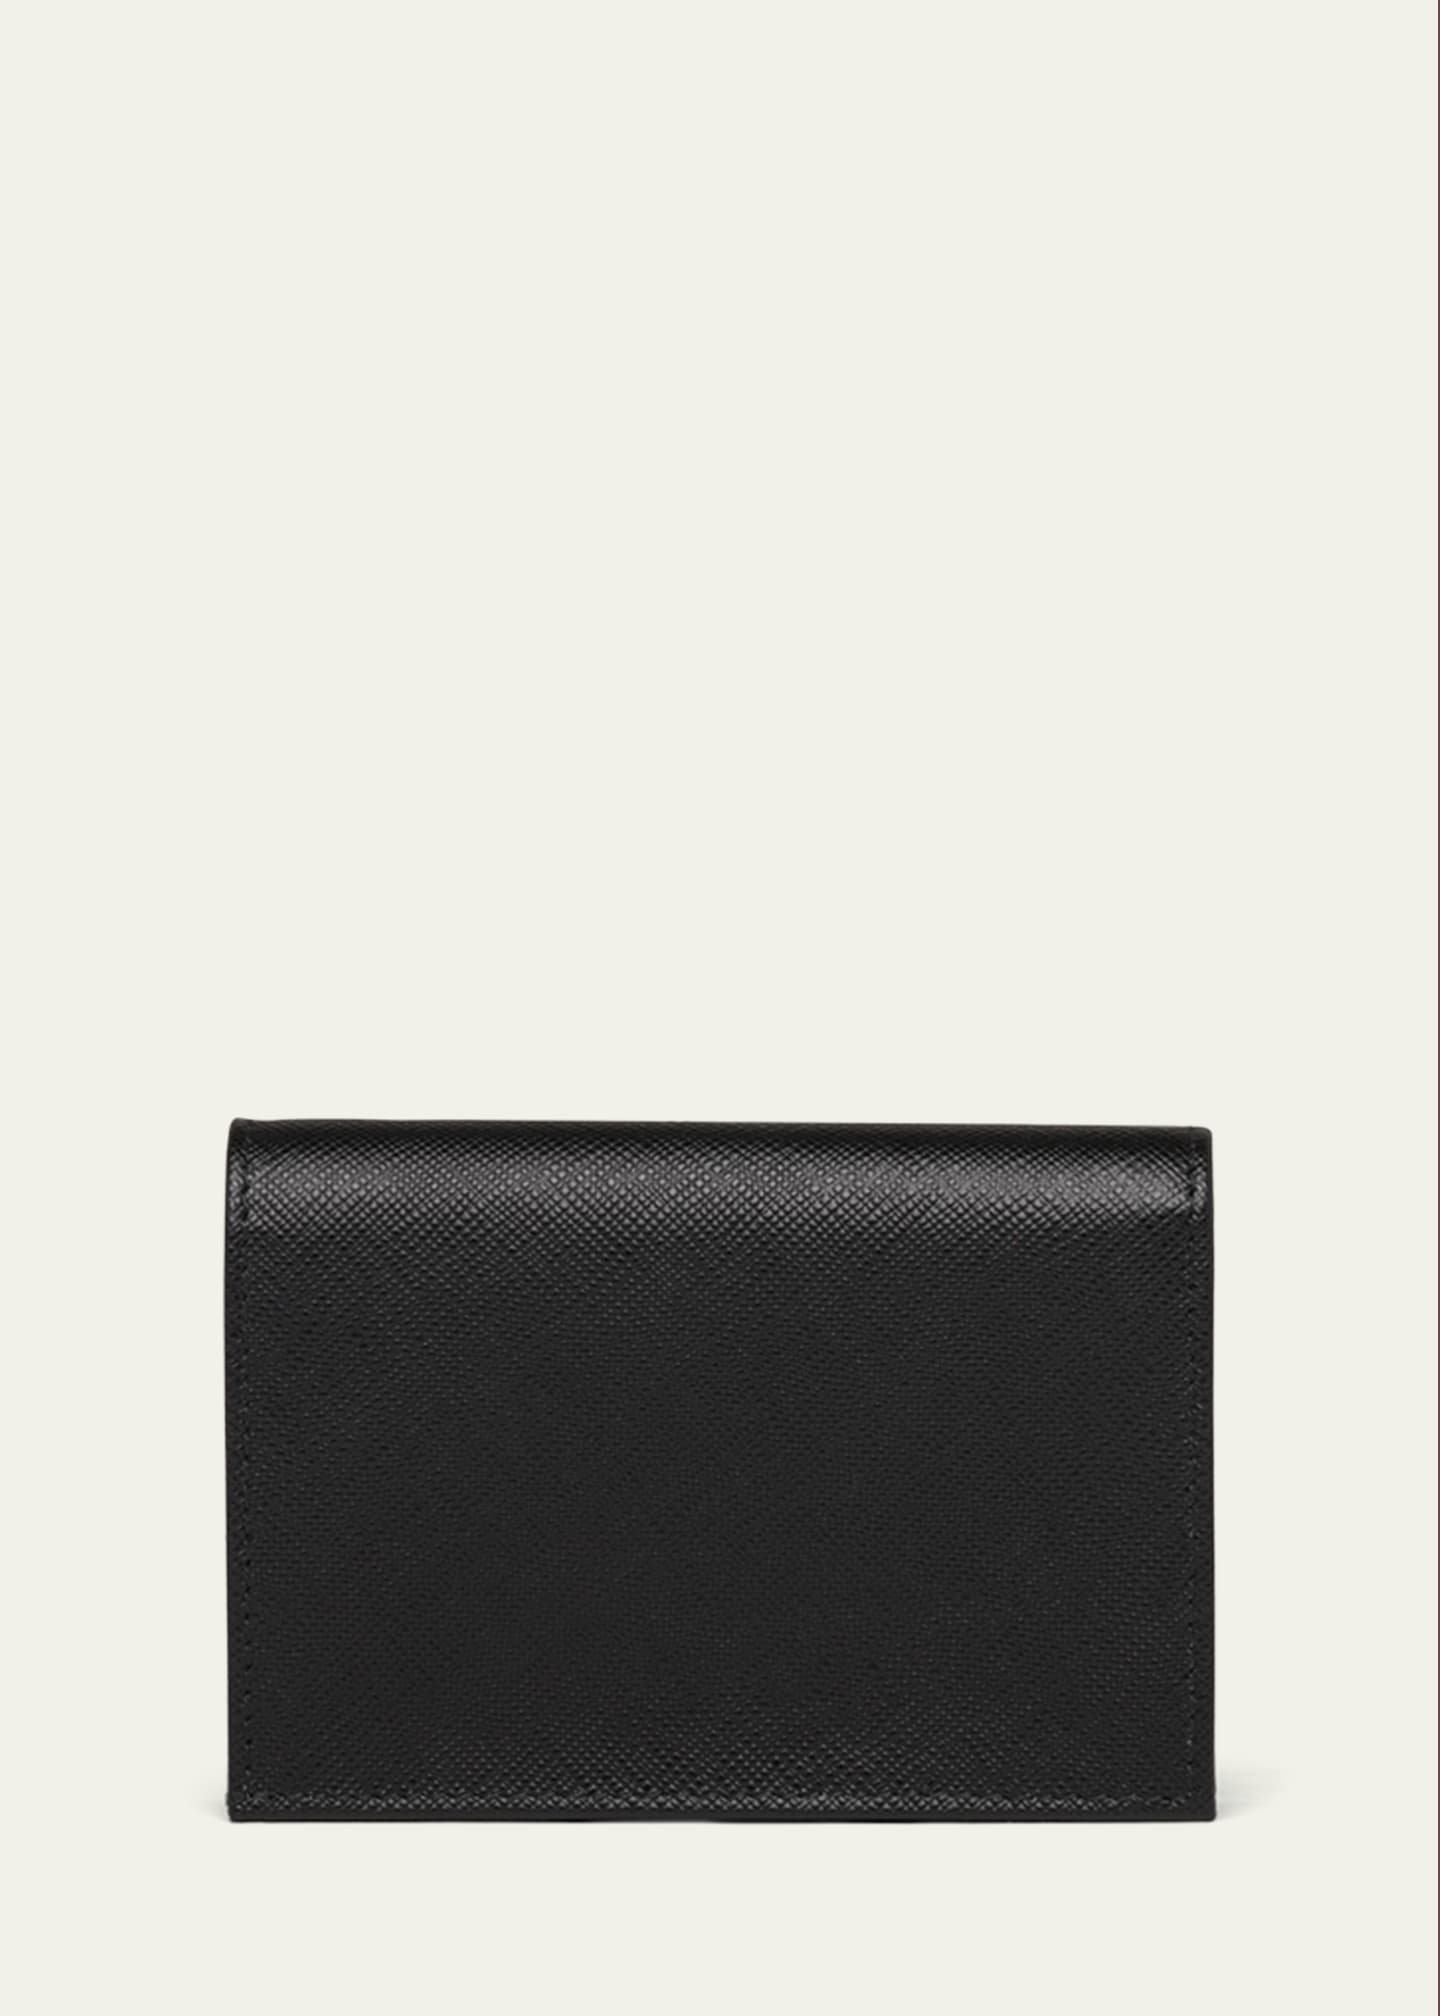 Small Saffiano leather wallet